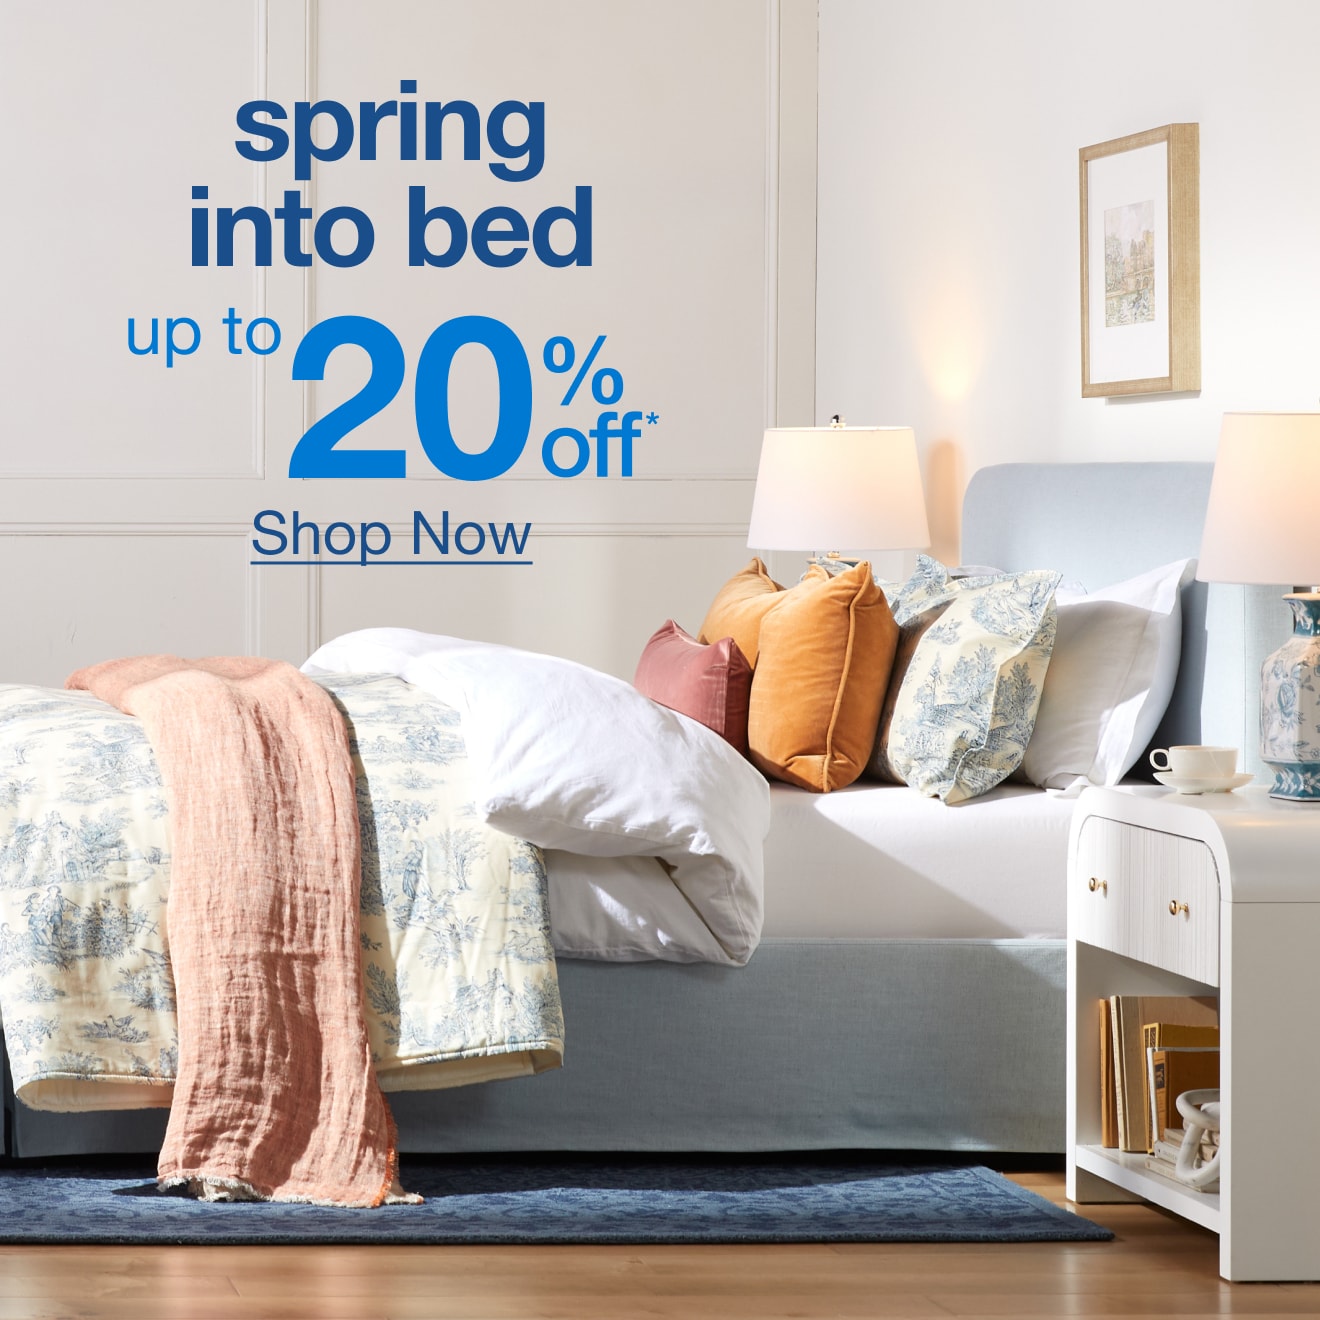 Up to 20% Off* Bedroom Furniture — Shop Now!